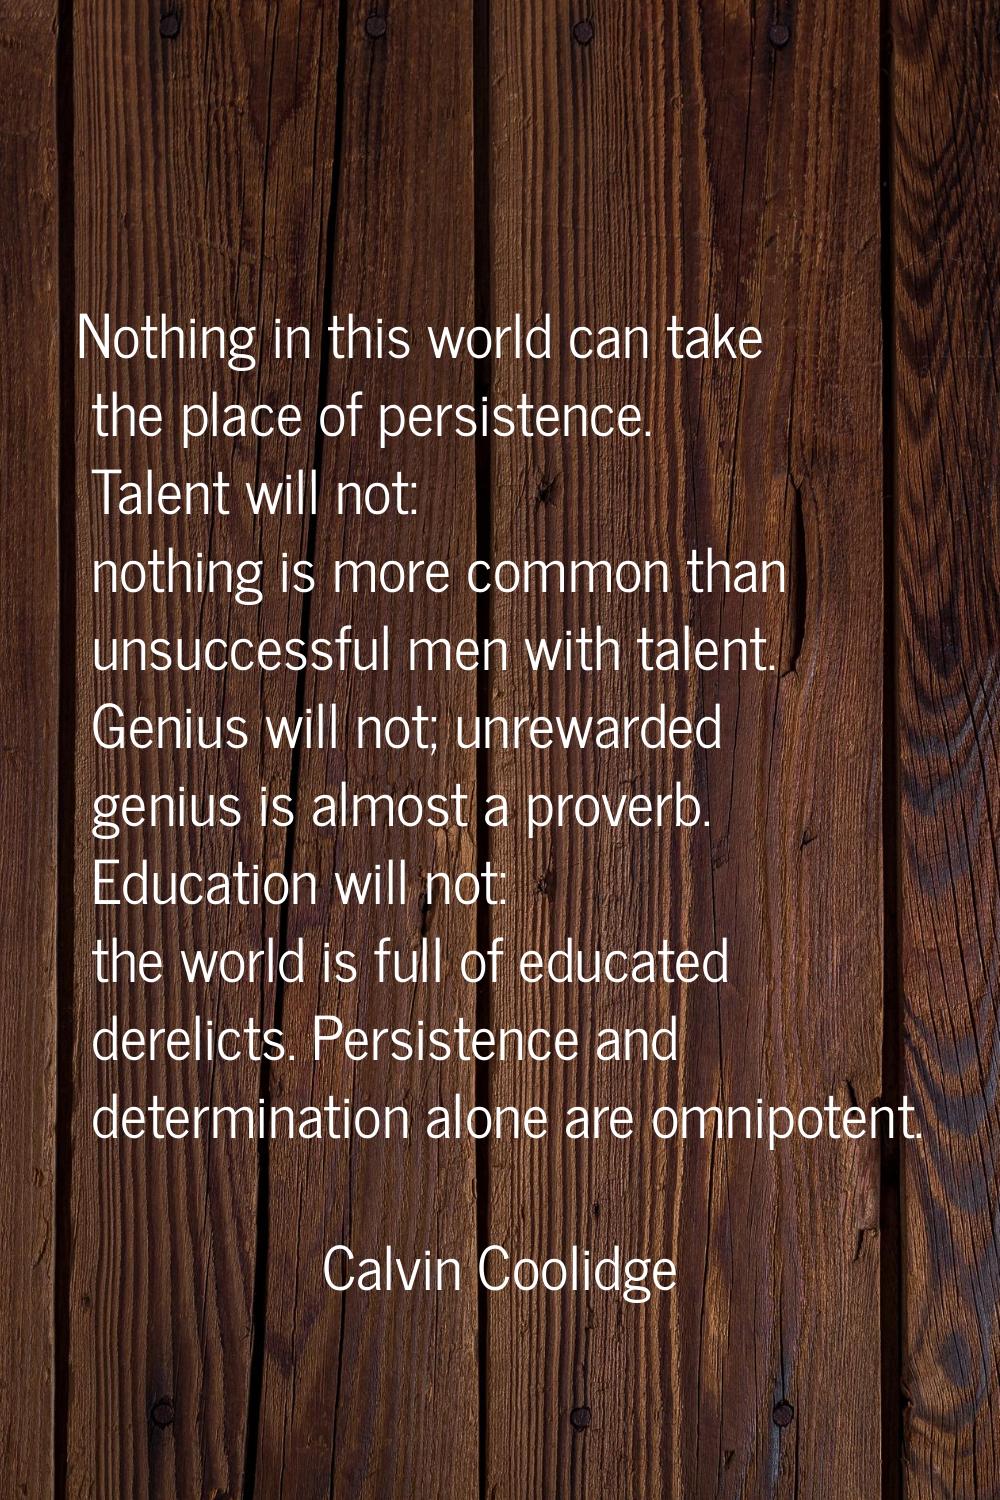 Nothing in this world can take the place of persistence. Talent will not: nothing is more common th